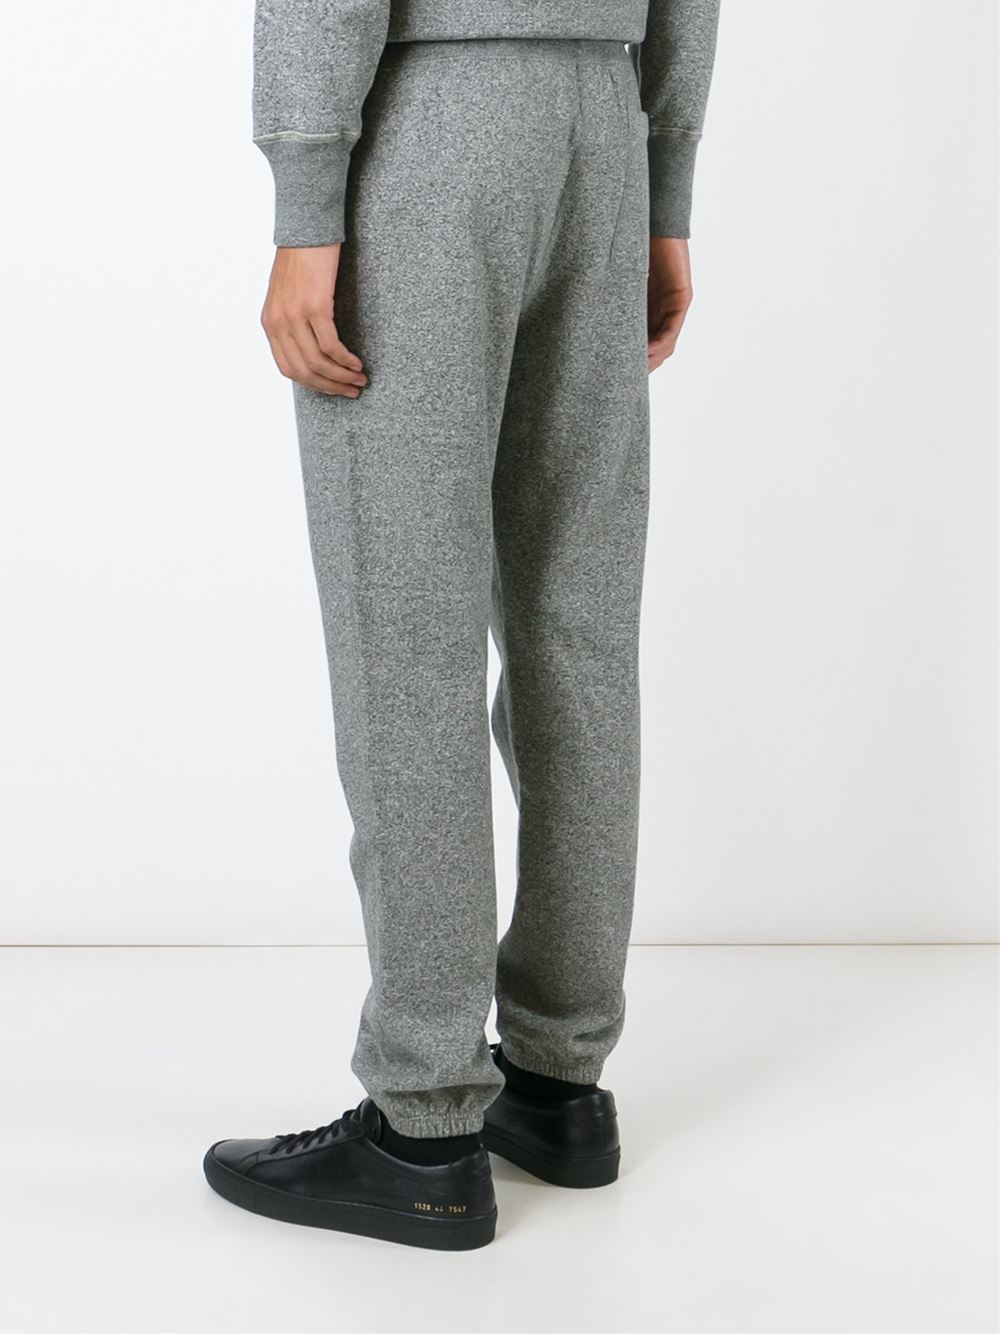 Champion Cotton Drawstring Track Pants in Grey (Gray) for Men - Lyst